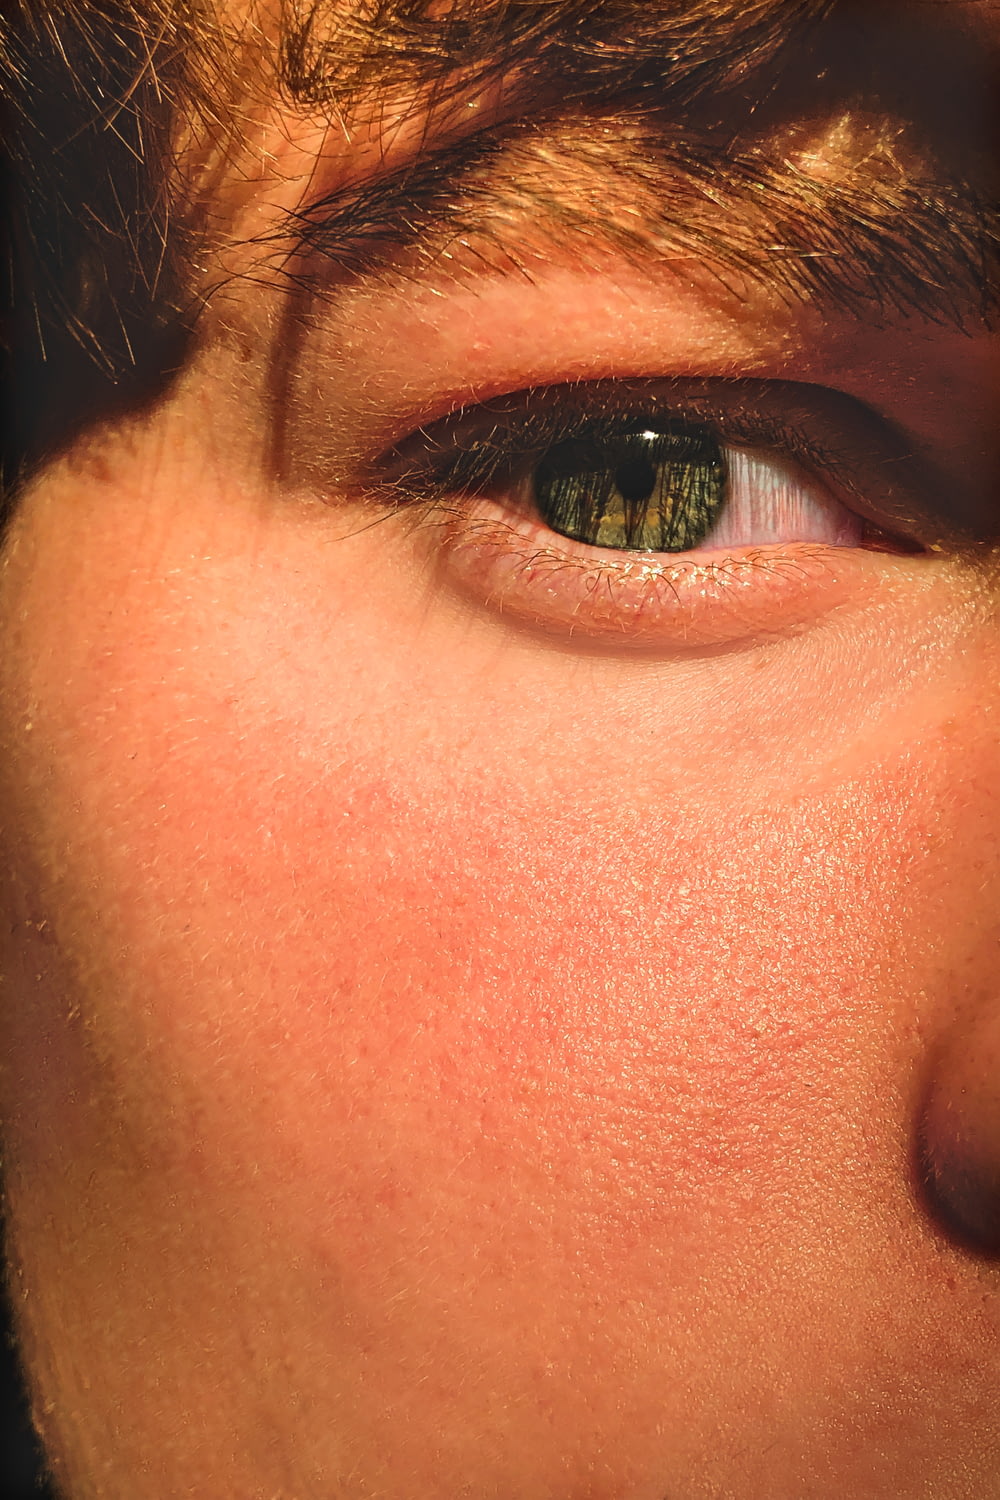 persons eye in close up